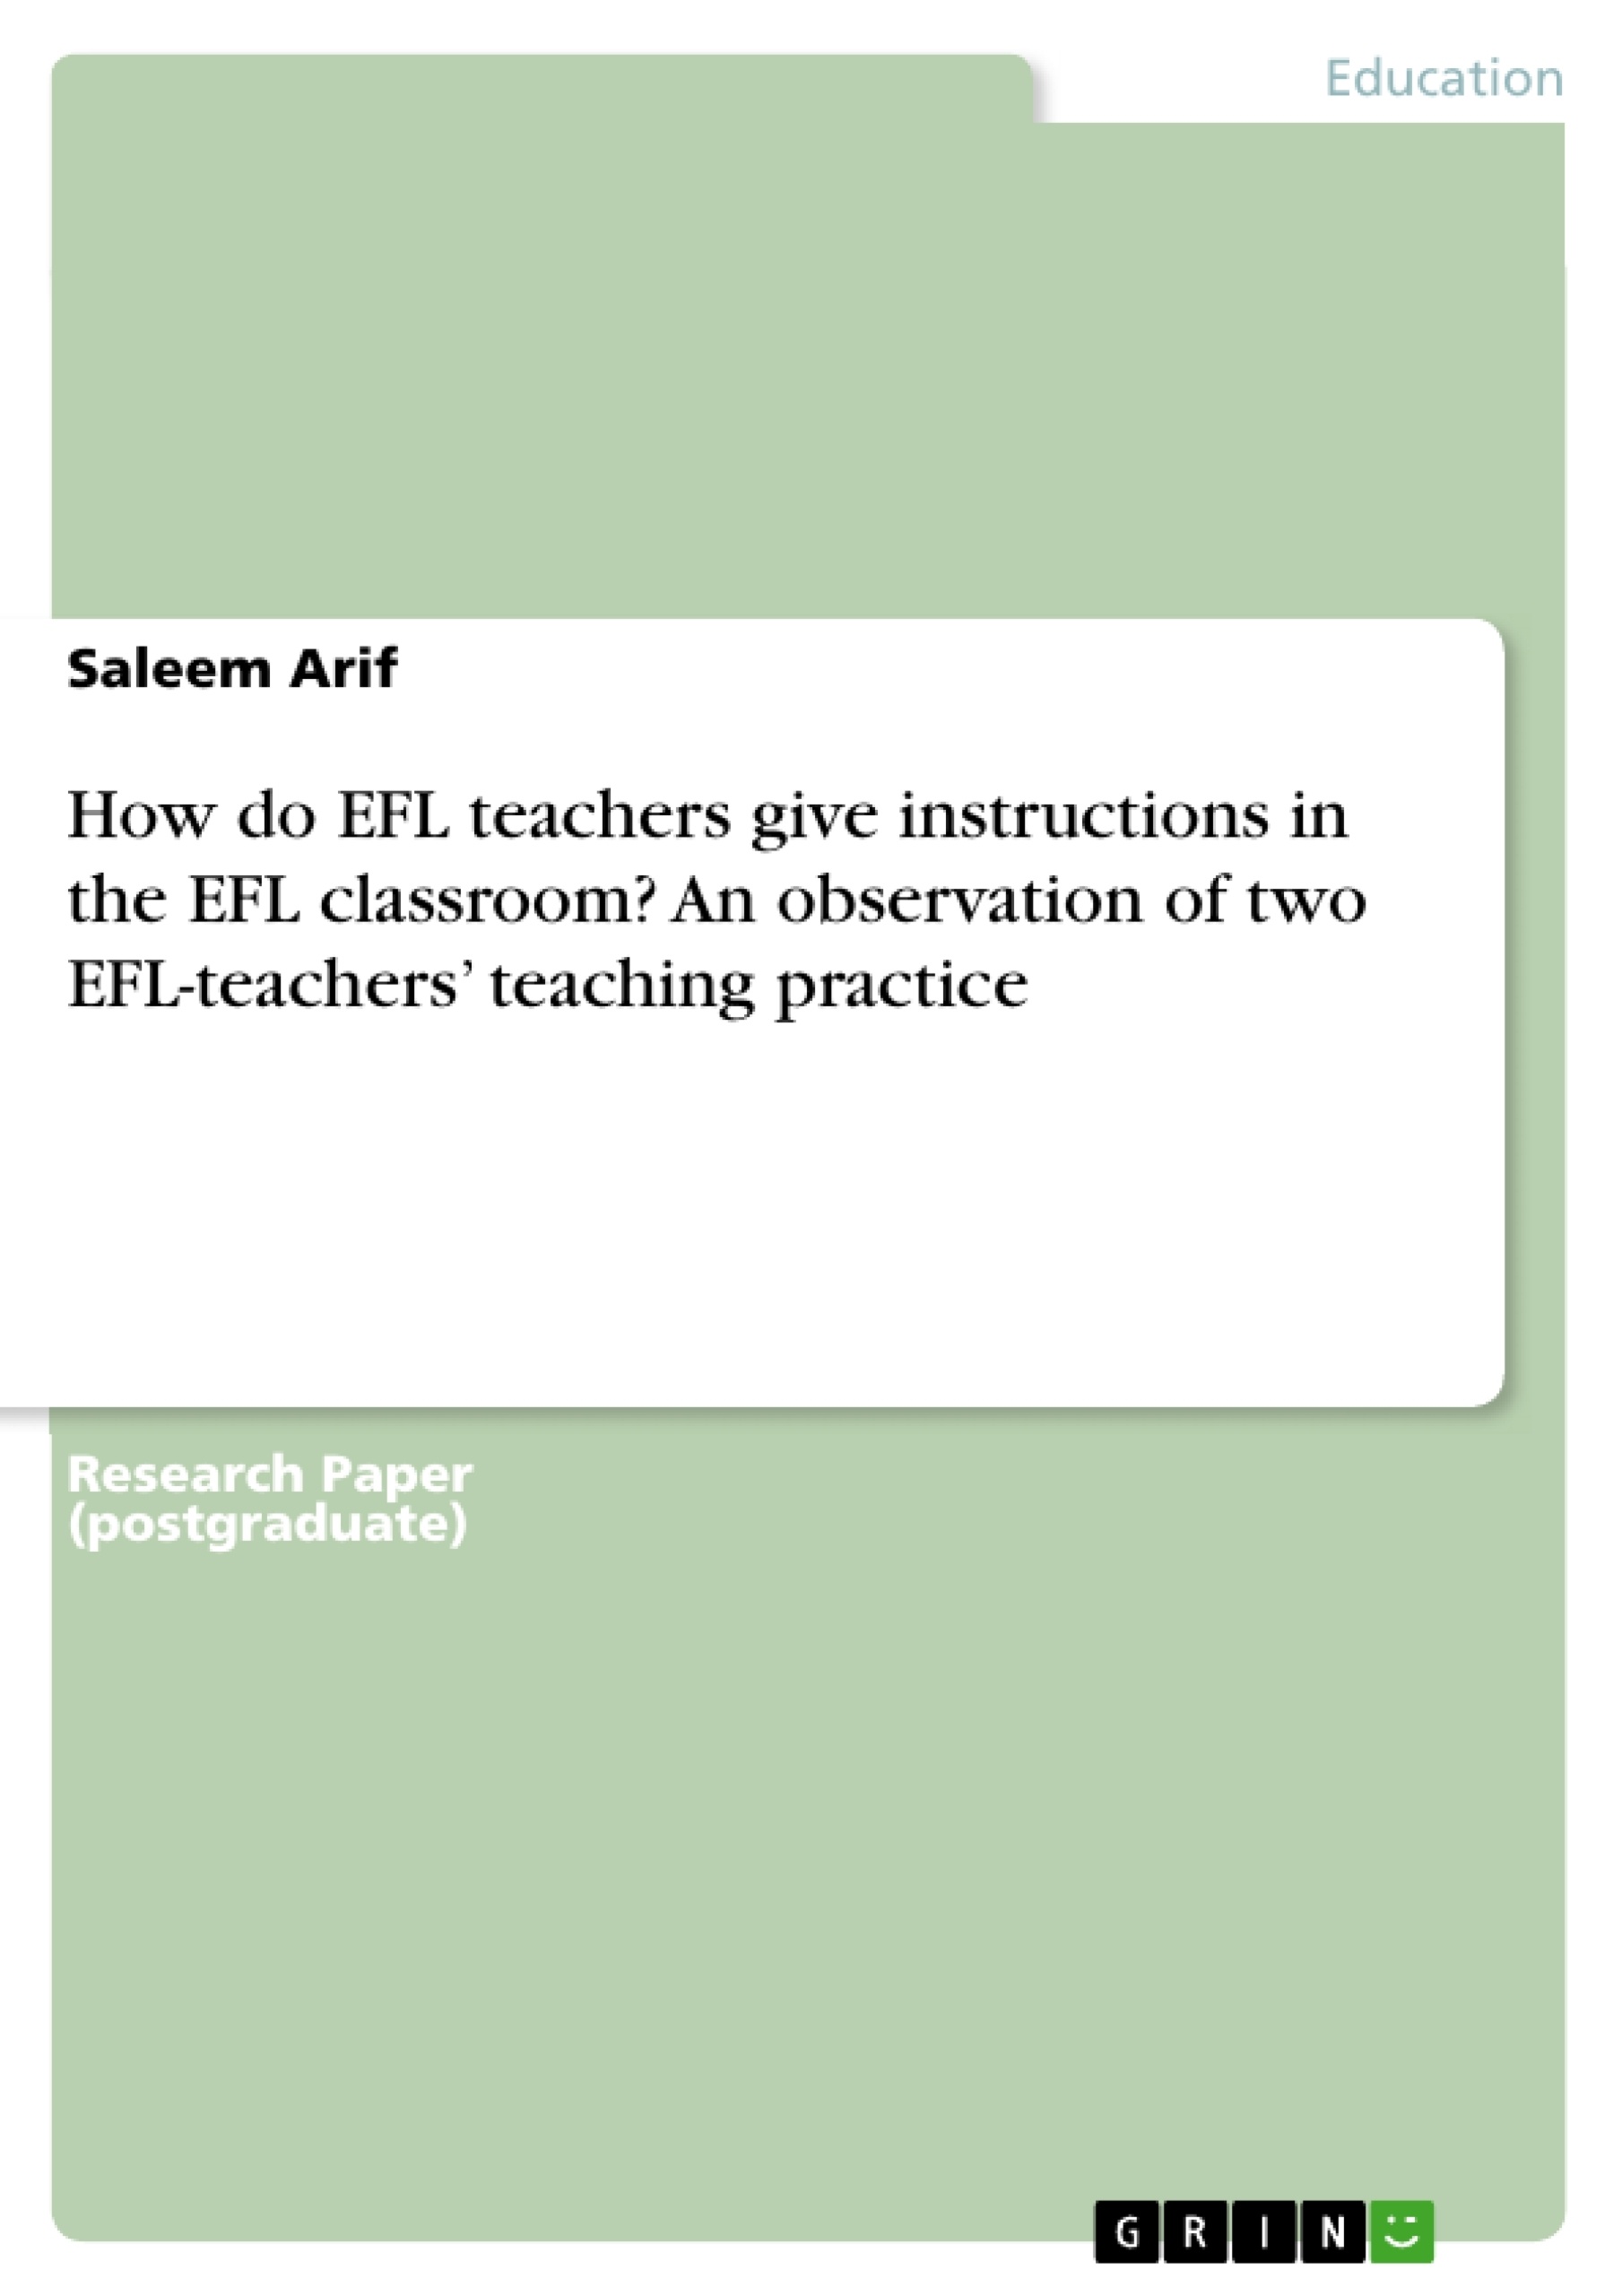 Title: How do EFL teachers give instructions in the EFL classroom? An observation of two EFL-teachers’ teaching practice